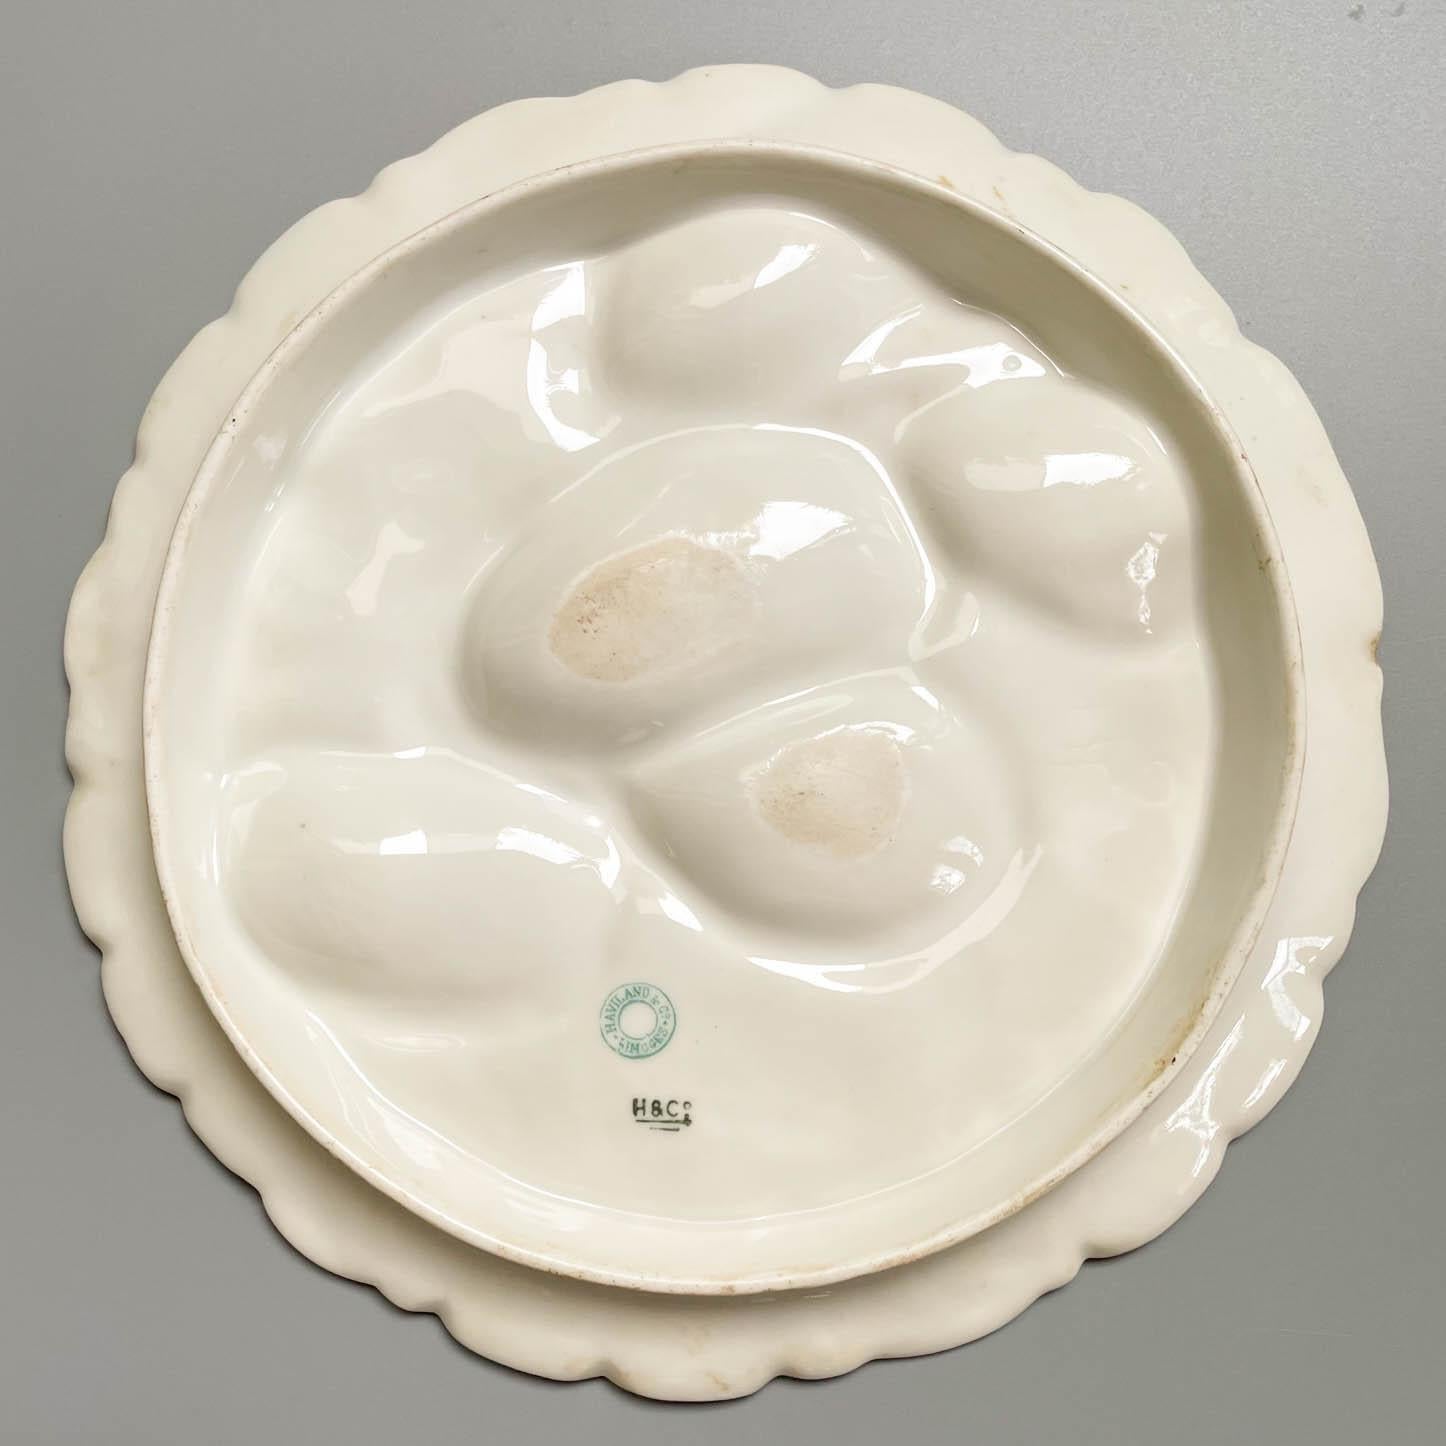 A 19th Century French turkey oyster porcelain plate with five white wells on raspberry pink ground. Decorated with delicate hand-painted gilt branches and gilt trimmed ruffled rim. Mark on back: Haviland & Co. Limoges. Circa 1880-1900. Dimensions: